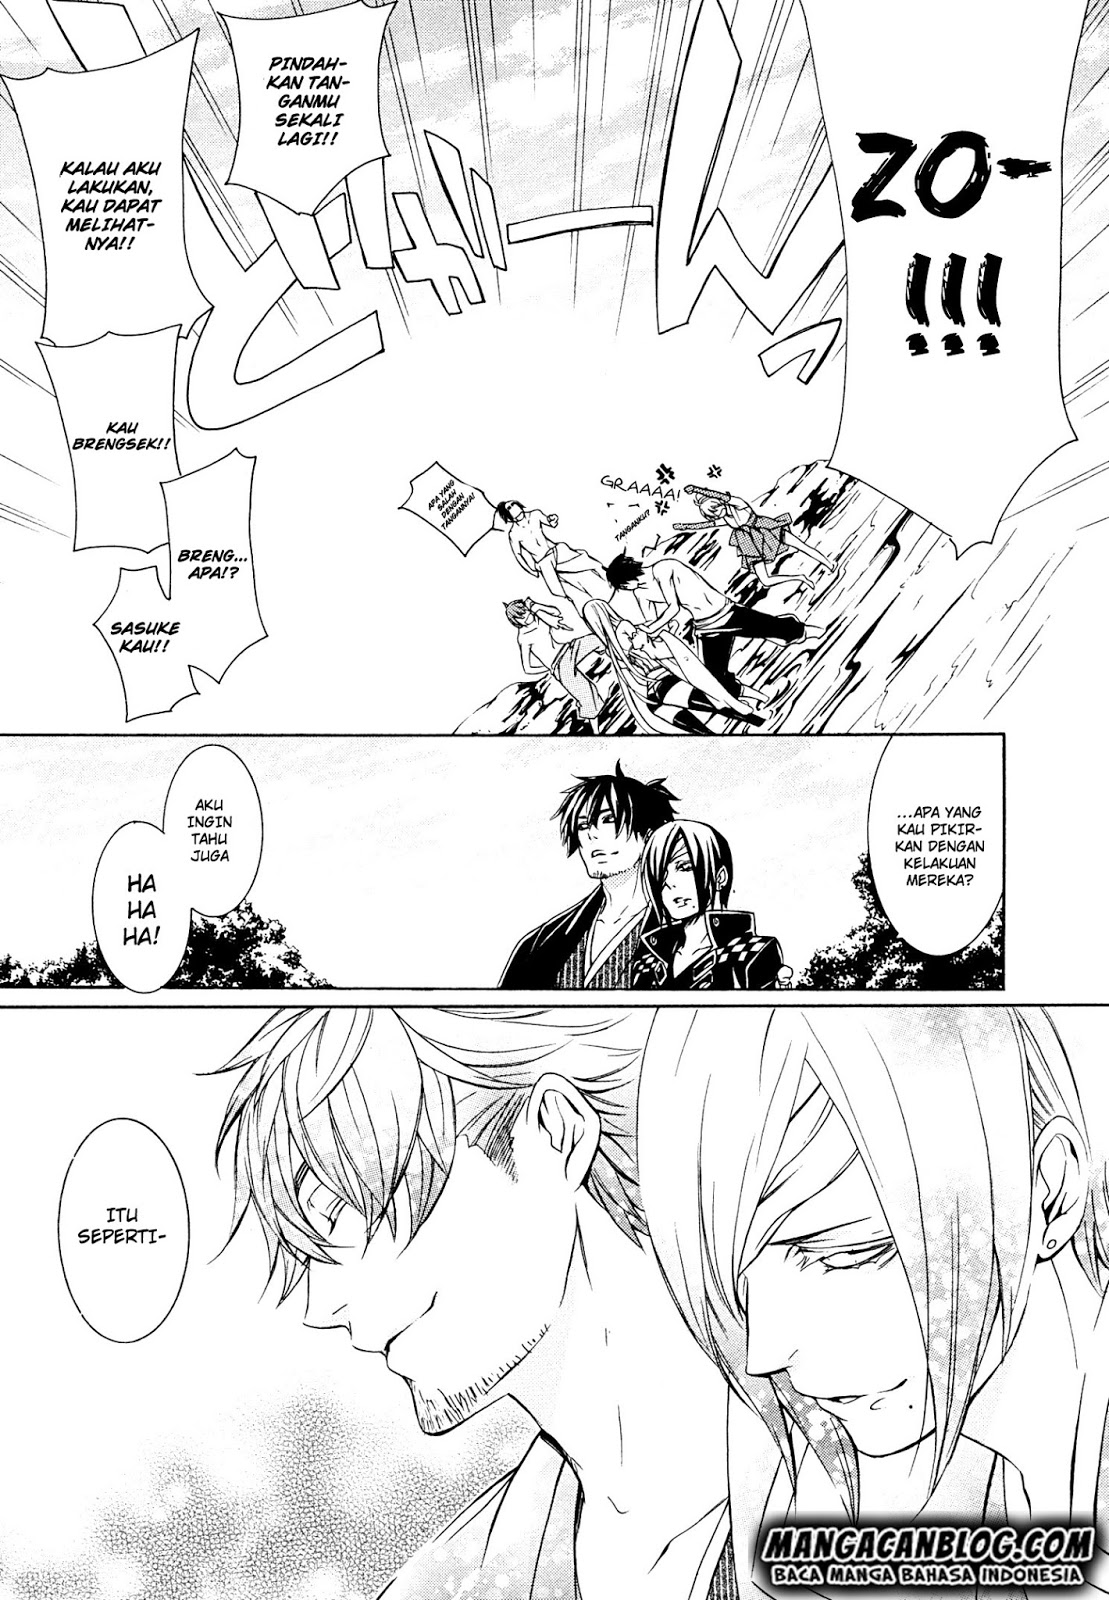 Brave 10 S Chapter 20